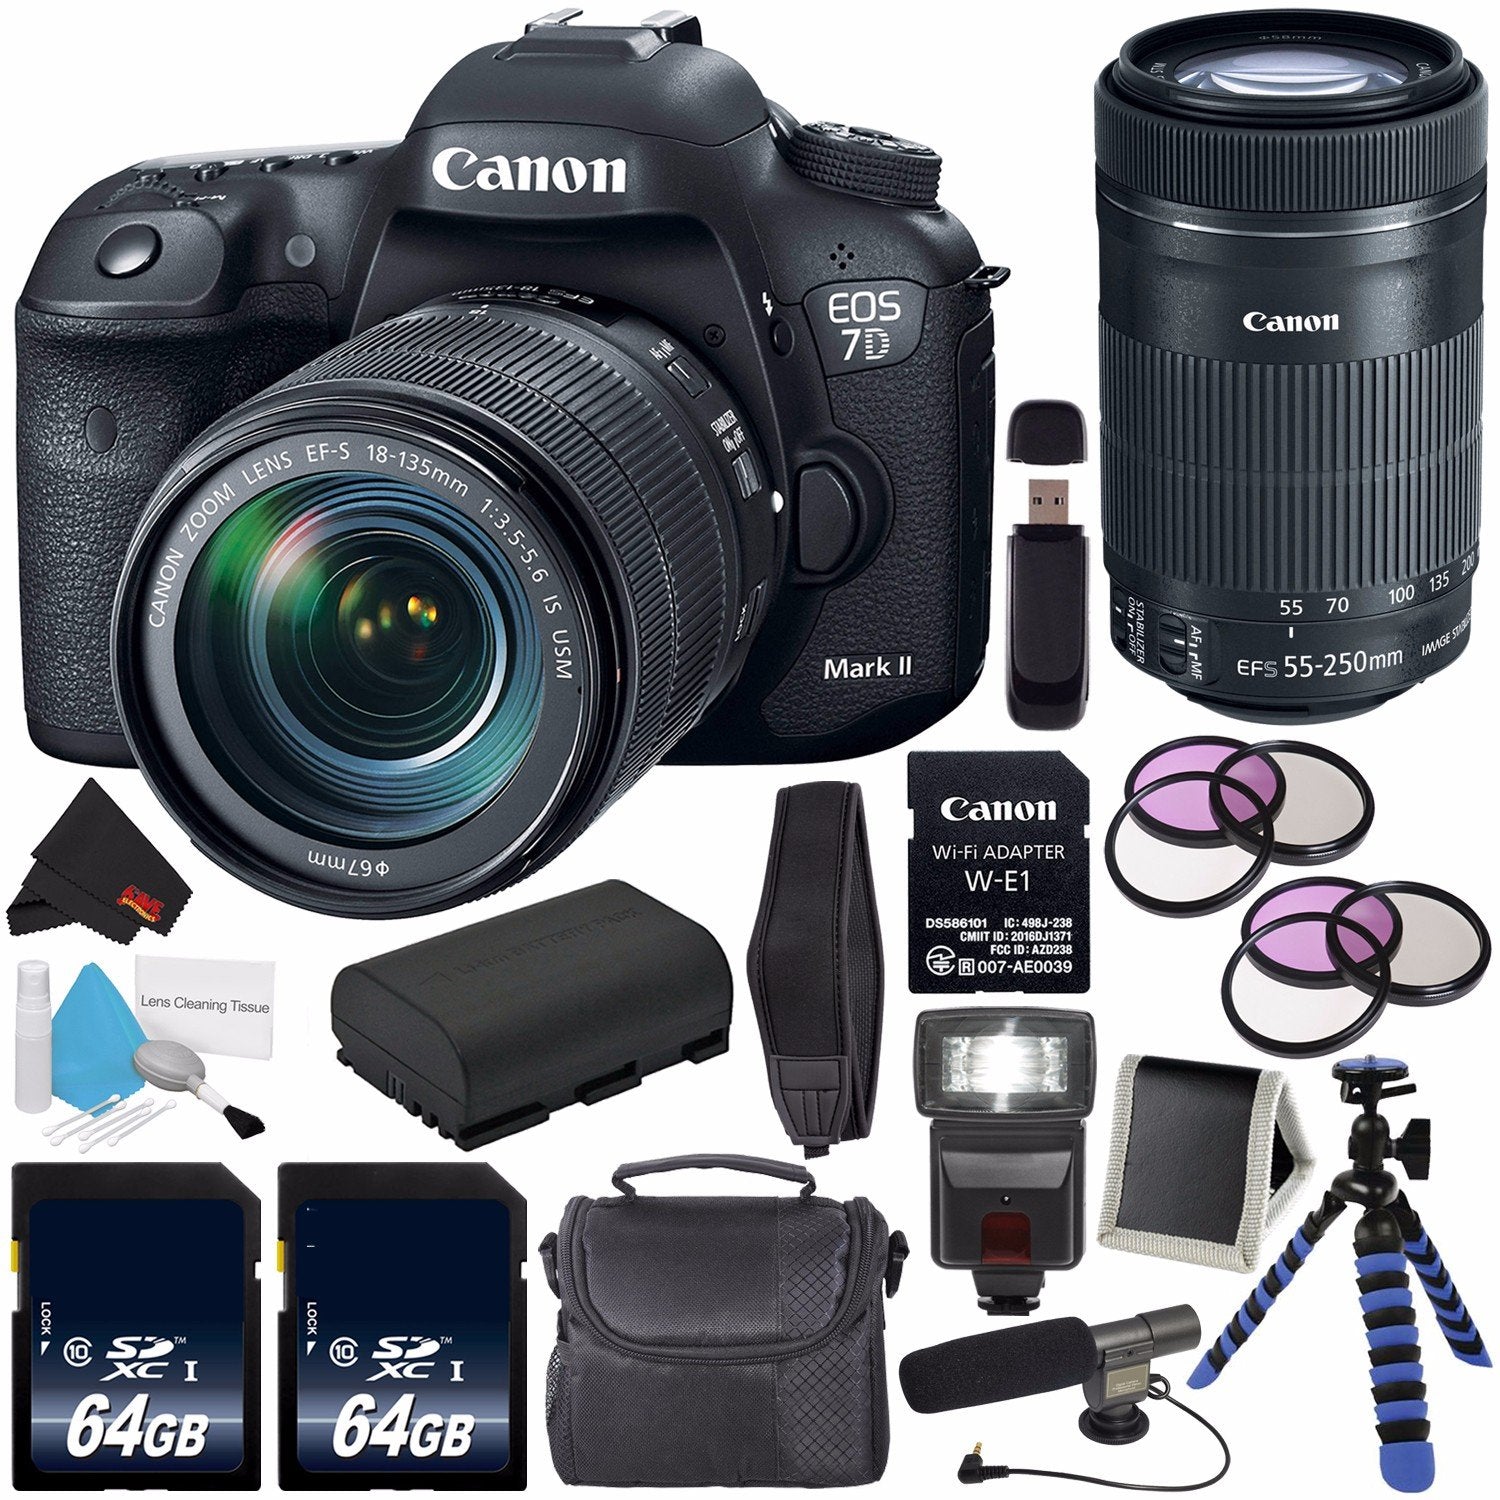 Canon EOS 7D Mark II DSLR Camera (International Version) with 18-135mm f/3.5-5.6 IS USM Lens & W-E1 Wi-Fi Adapter 9128B1